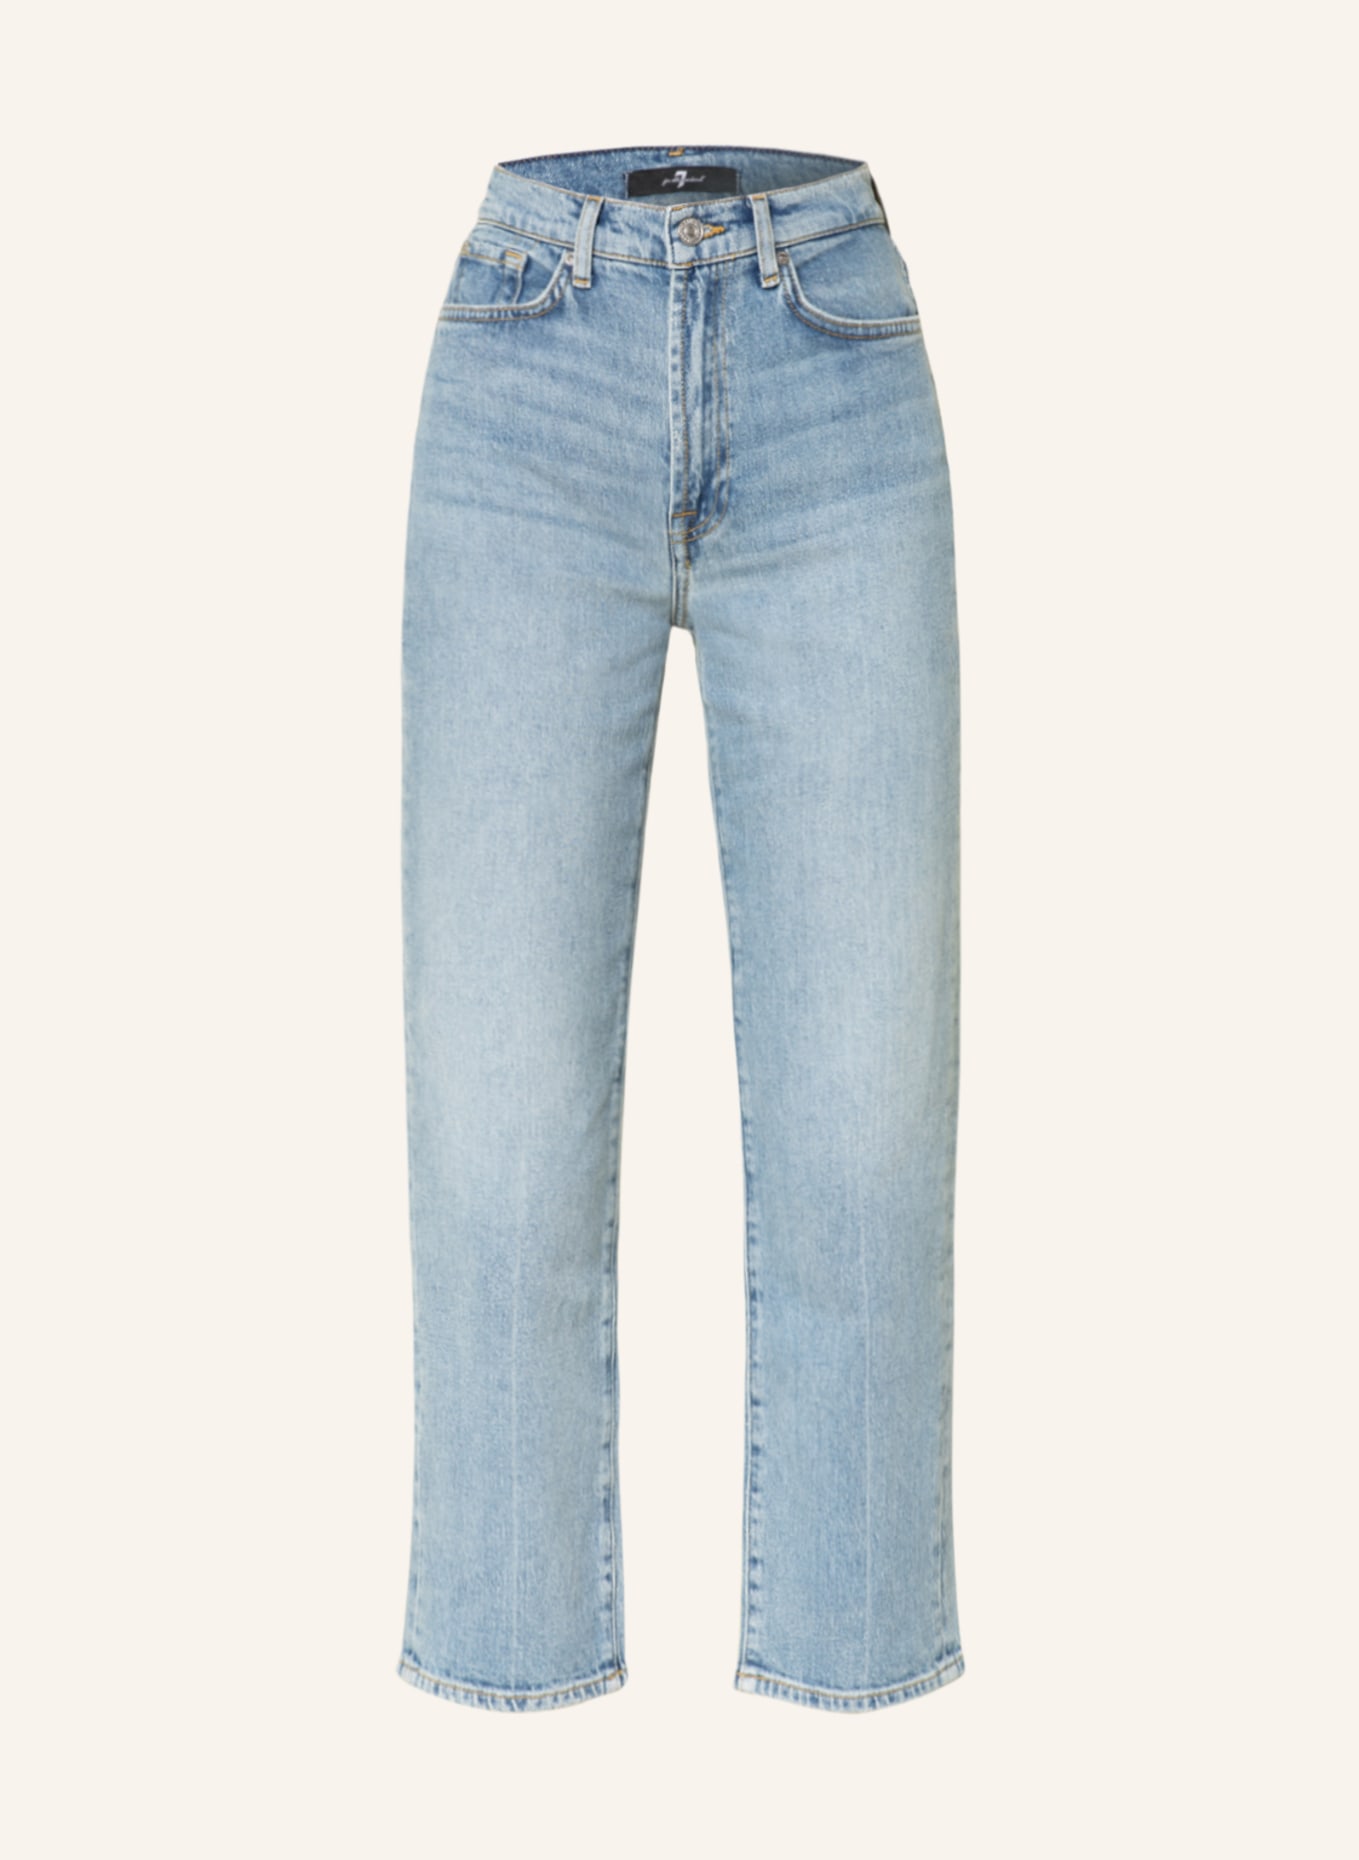 7 for all mankind Mom Jeans LOGAN STOVEPIPE, Farbe: AW LIGHT BLUE (Bild 1)